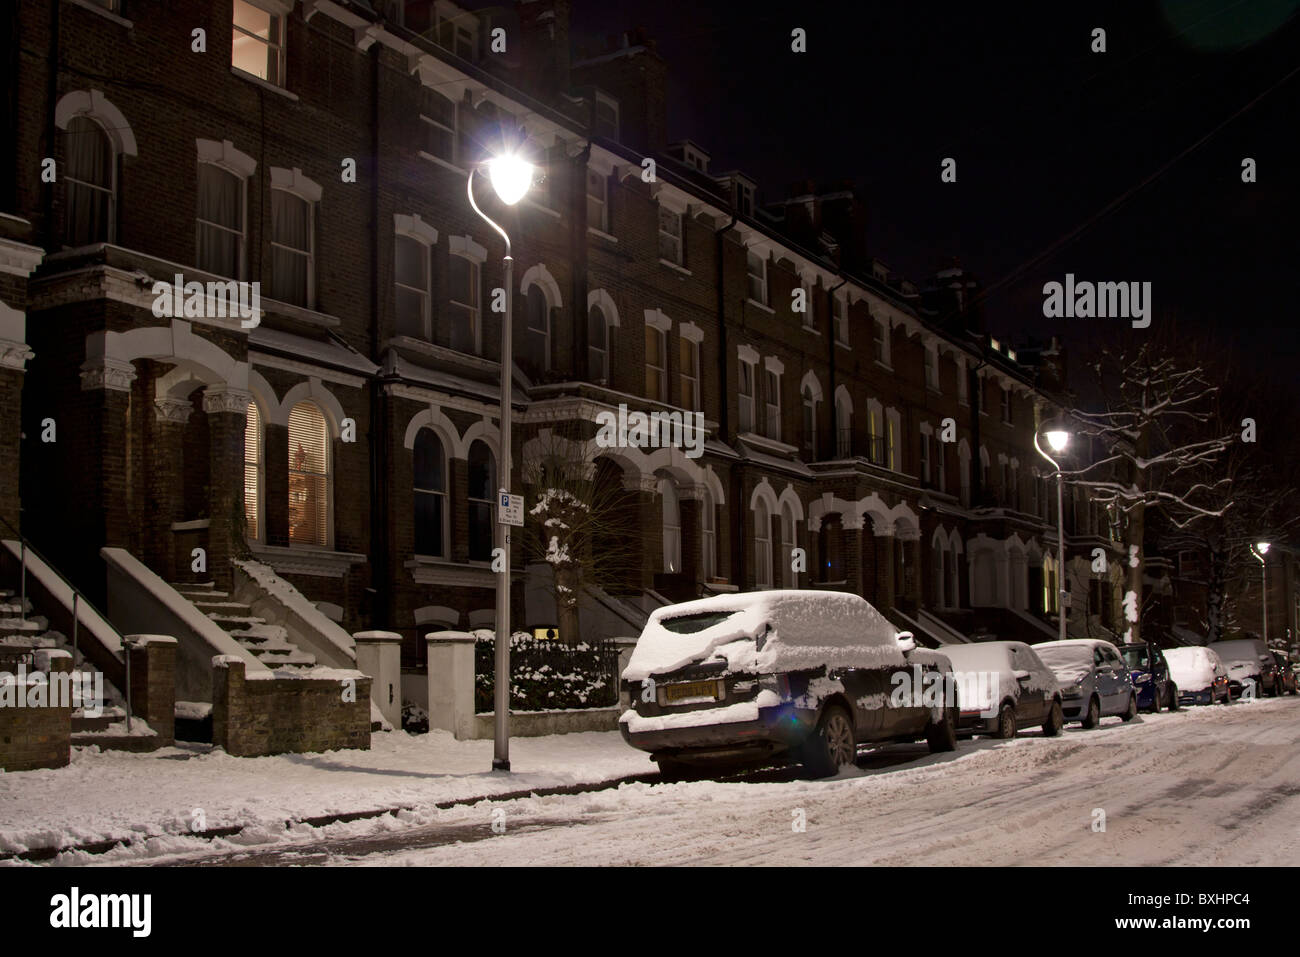 Victorian Terraced Houses - Ospringe Road NW5 - Camden - London Stock Photo